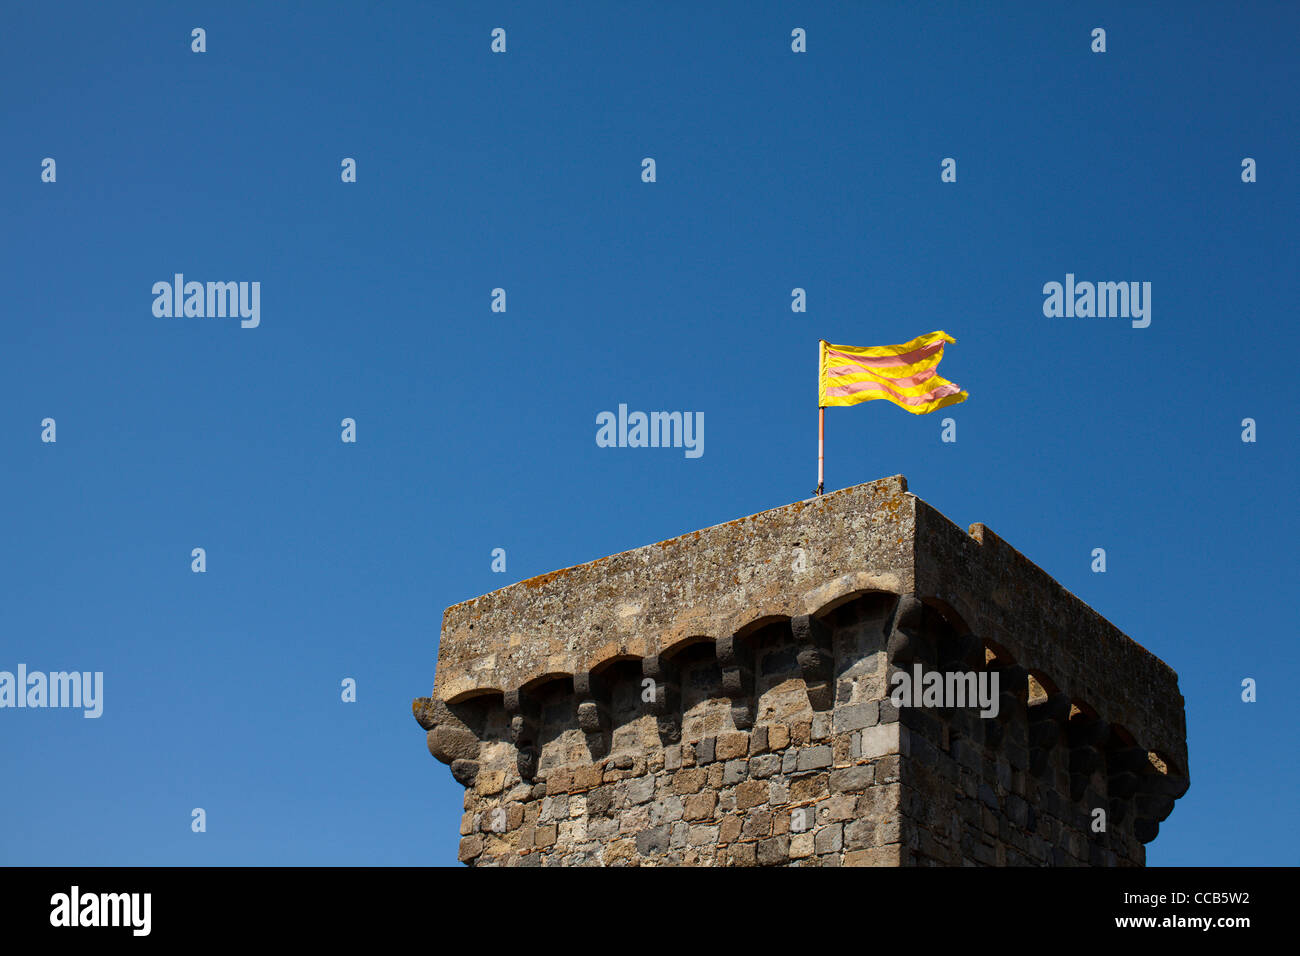 The Bolsena flag flying above the town castle, Italy. Stock Photo